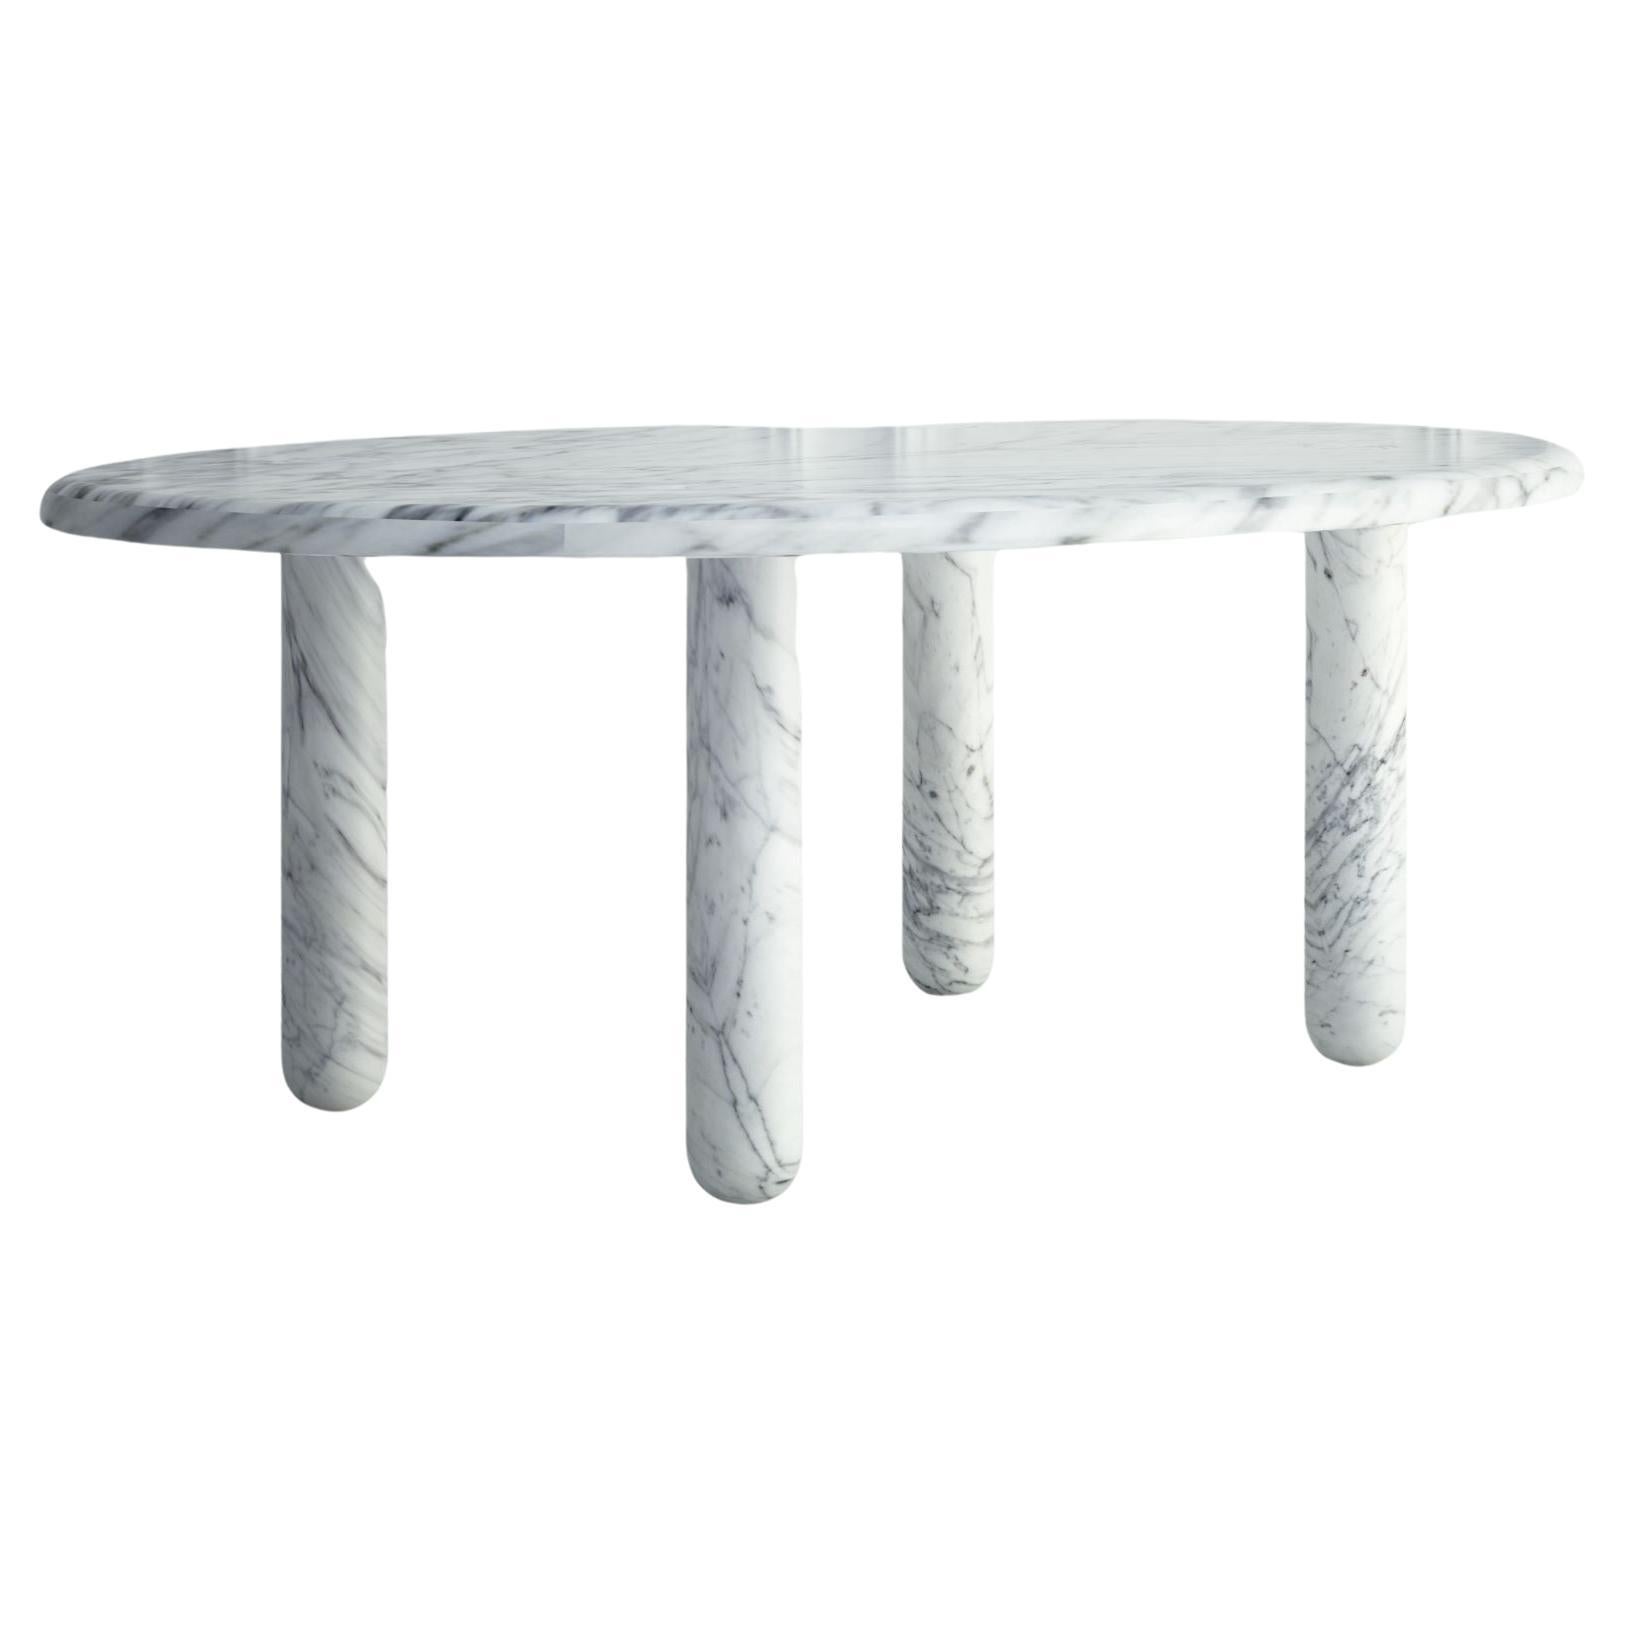 The Delphine: A Modern Stone Dining Table with an Oval Top and 4 Rounded Legs For Sale